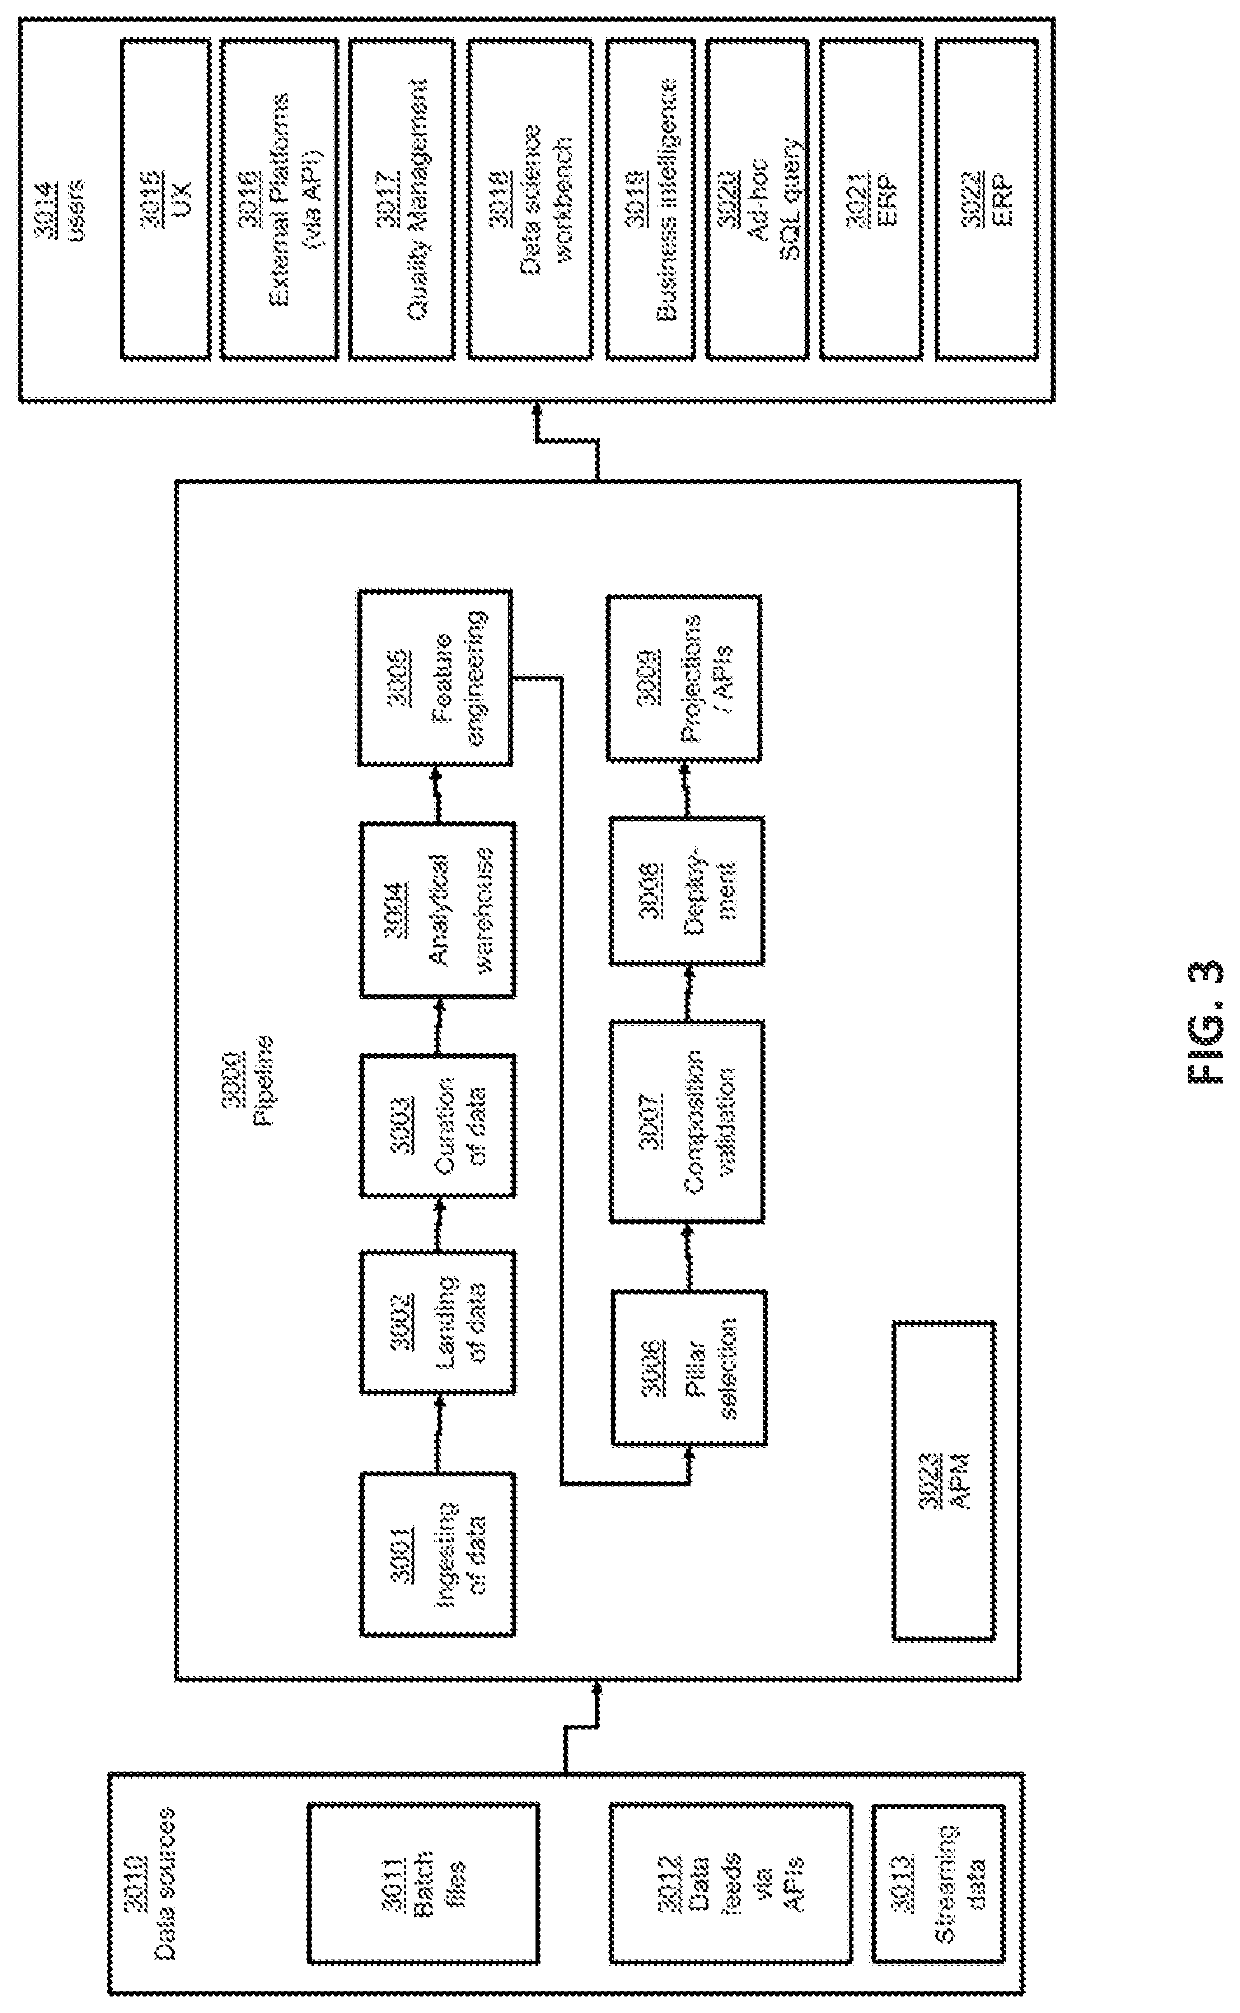 Auditable secure reverse engineering proof machine learning pipeline and methods